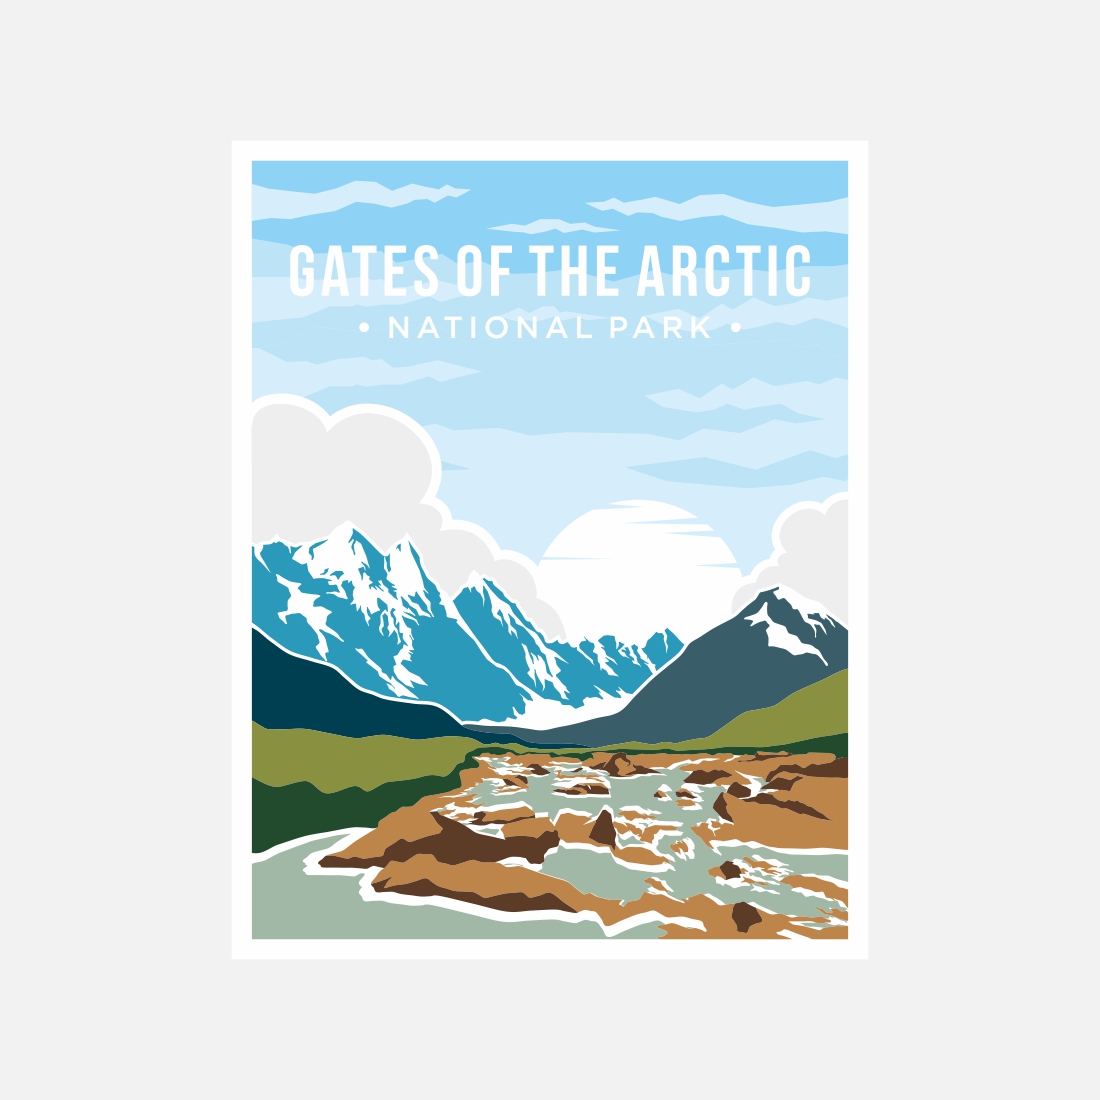 Gate of the arctic National Park poster vector illustration design – Only $8 cover image.